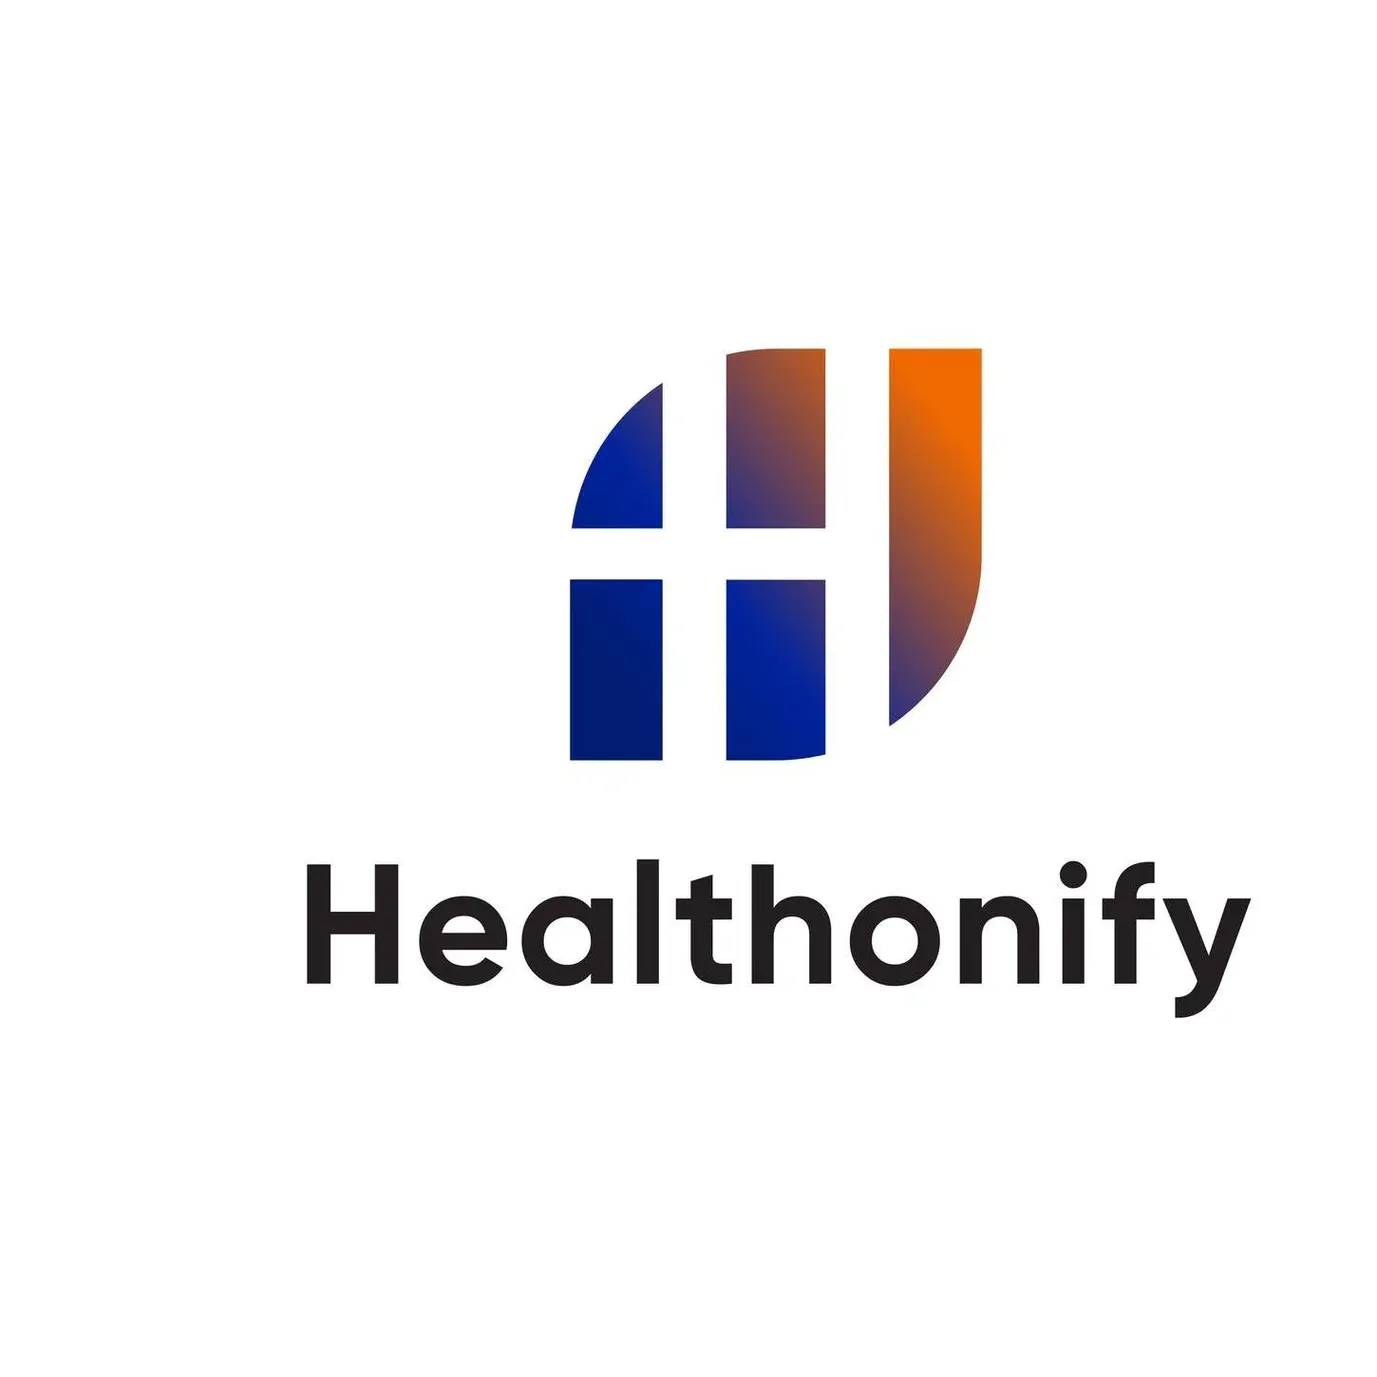 Healthonify Private Limited